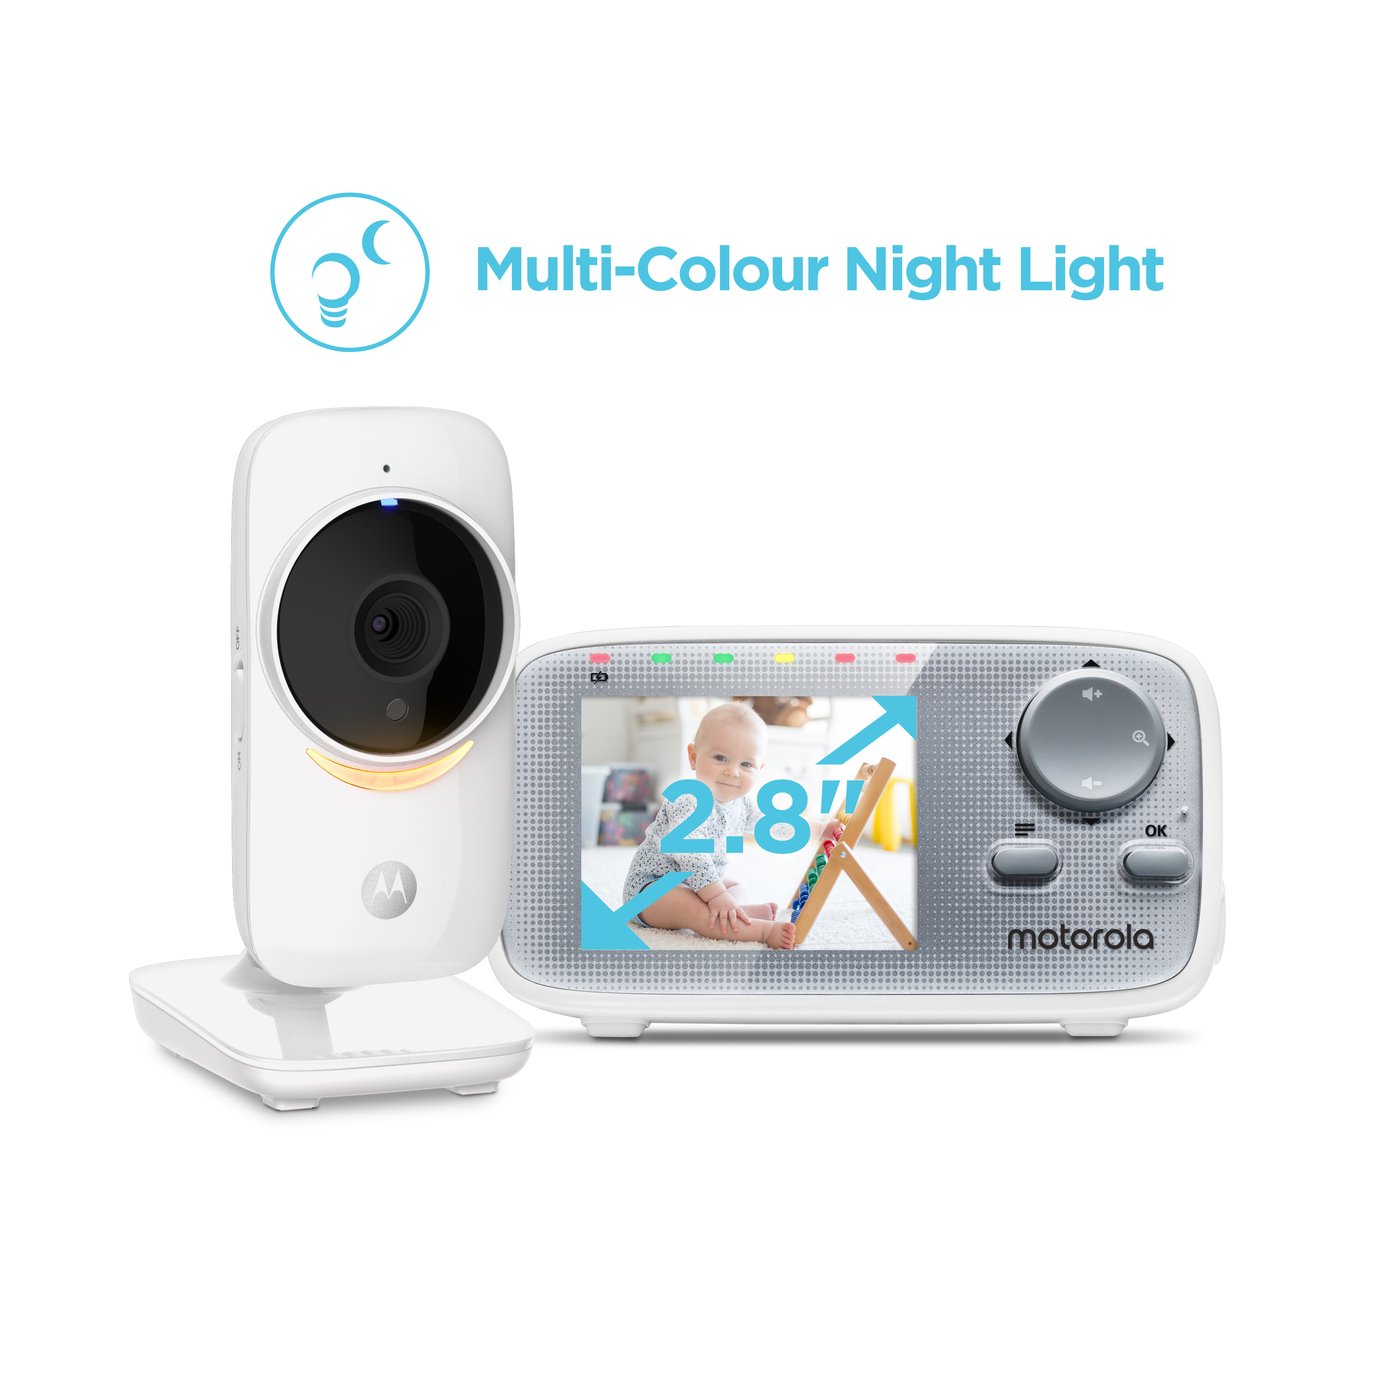 Motorola MBP 482 ANXL Nighlight Video 2.8 Inch Baby Monitor Review